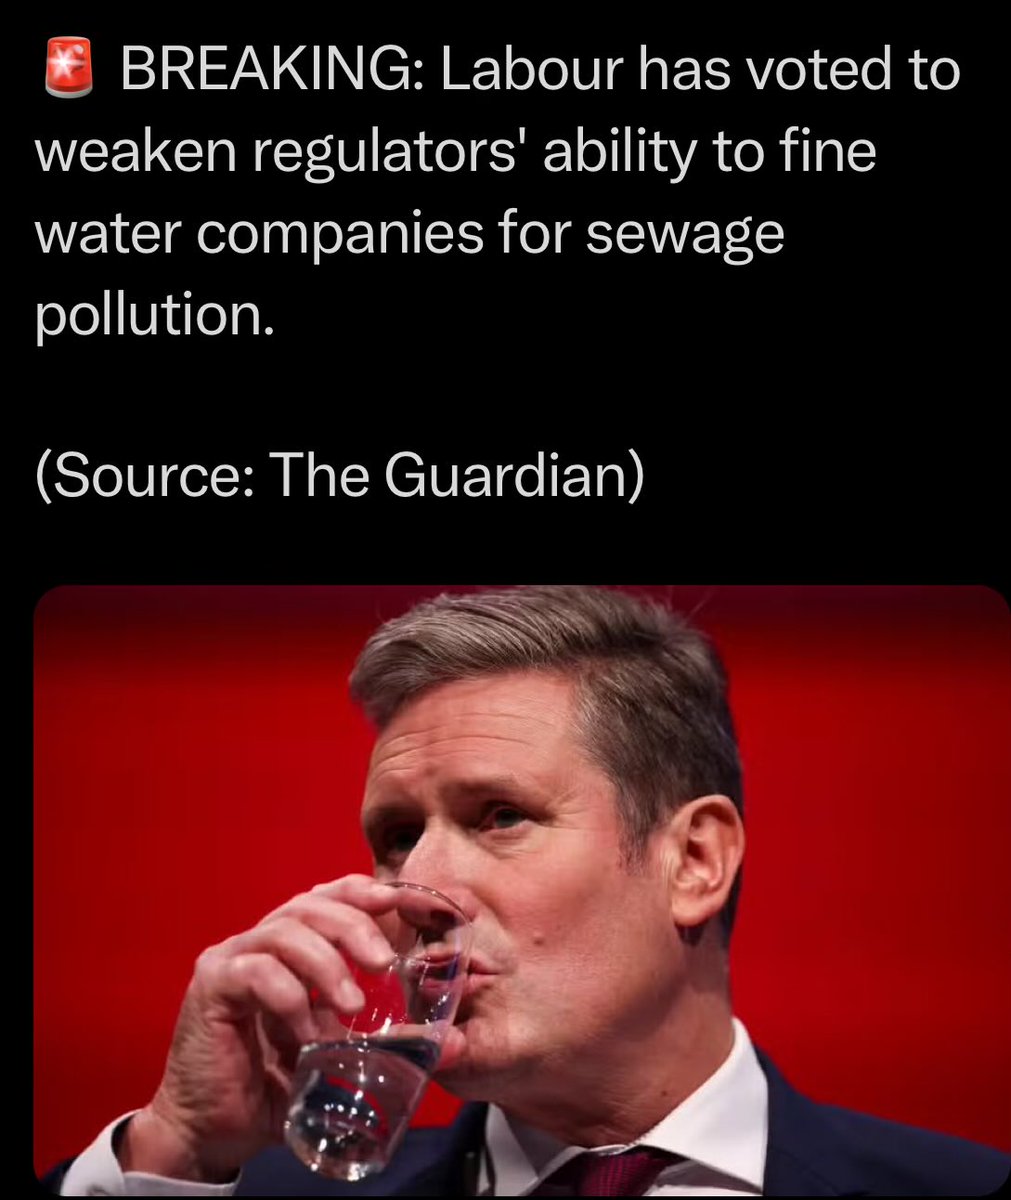 Labour votes to weaken regulators 'ability to fine water companies' for sewage pollution.